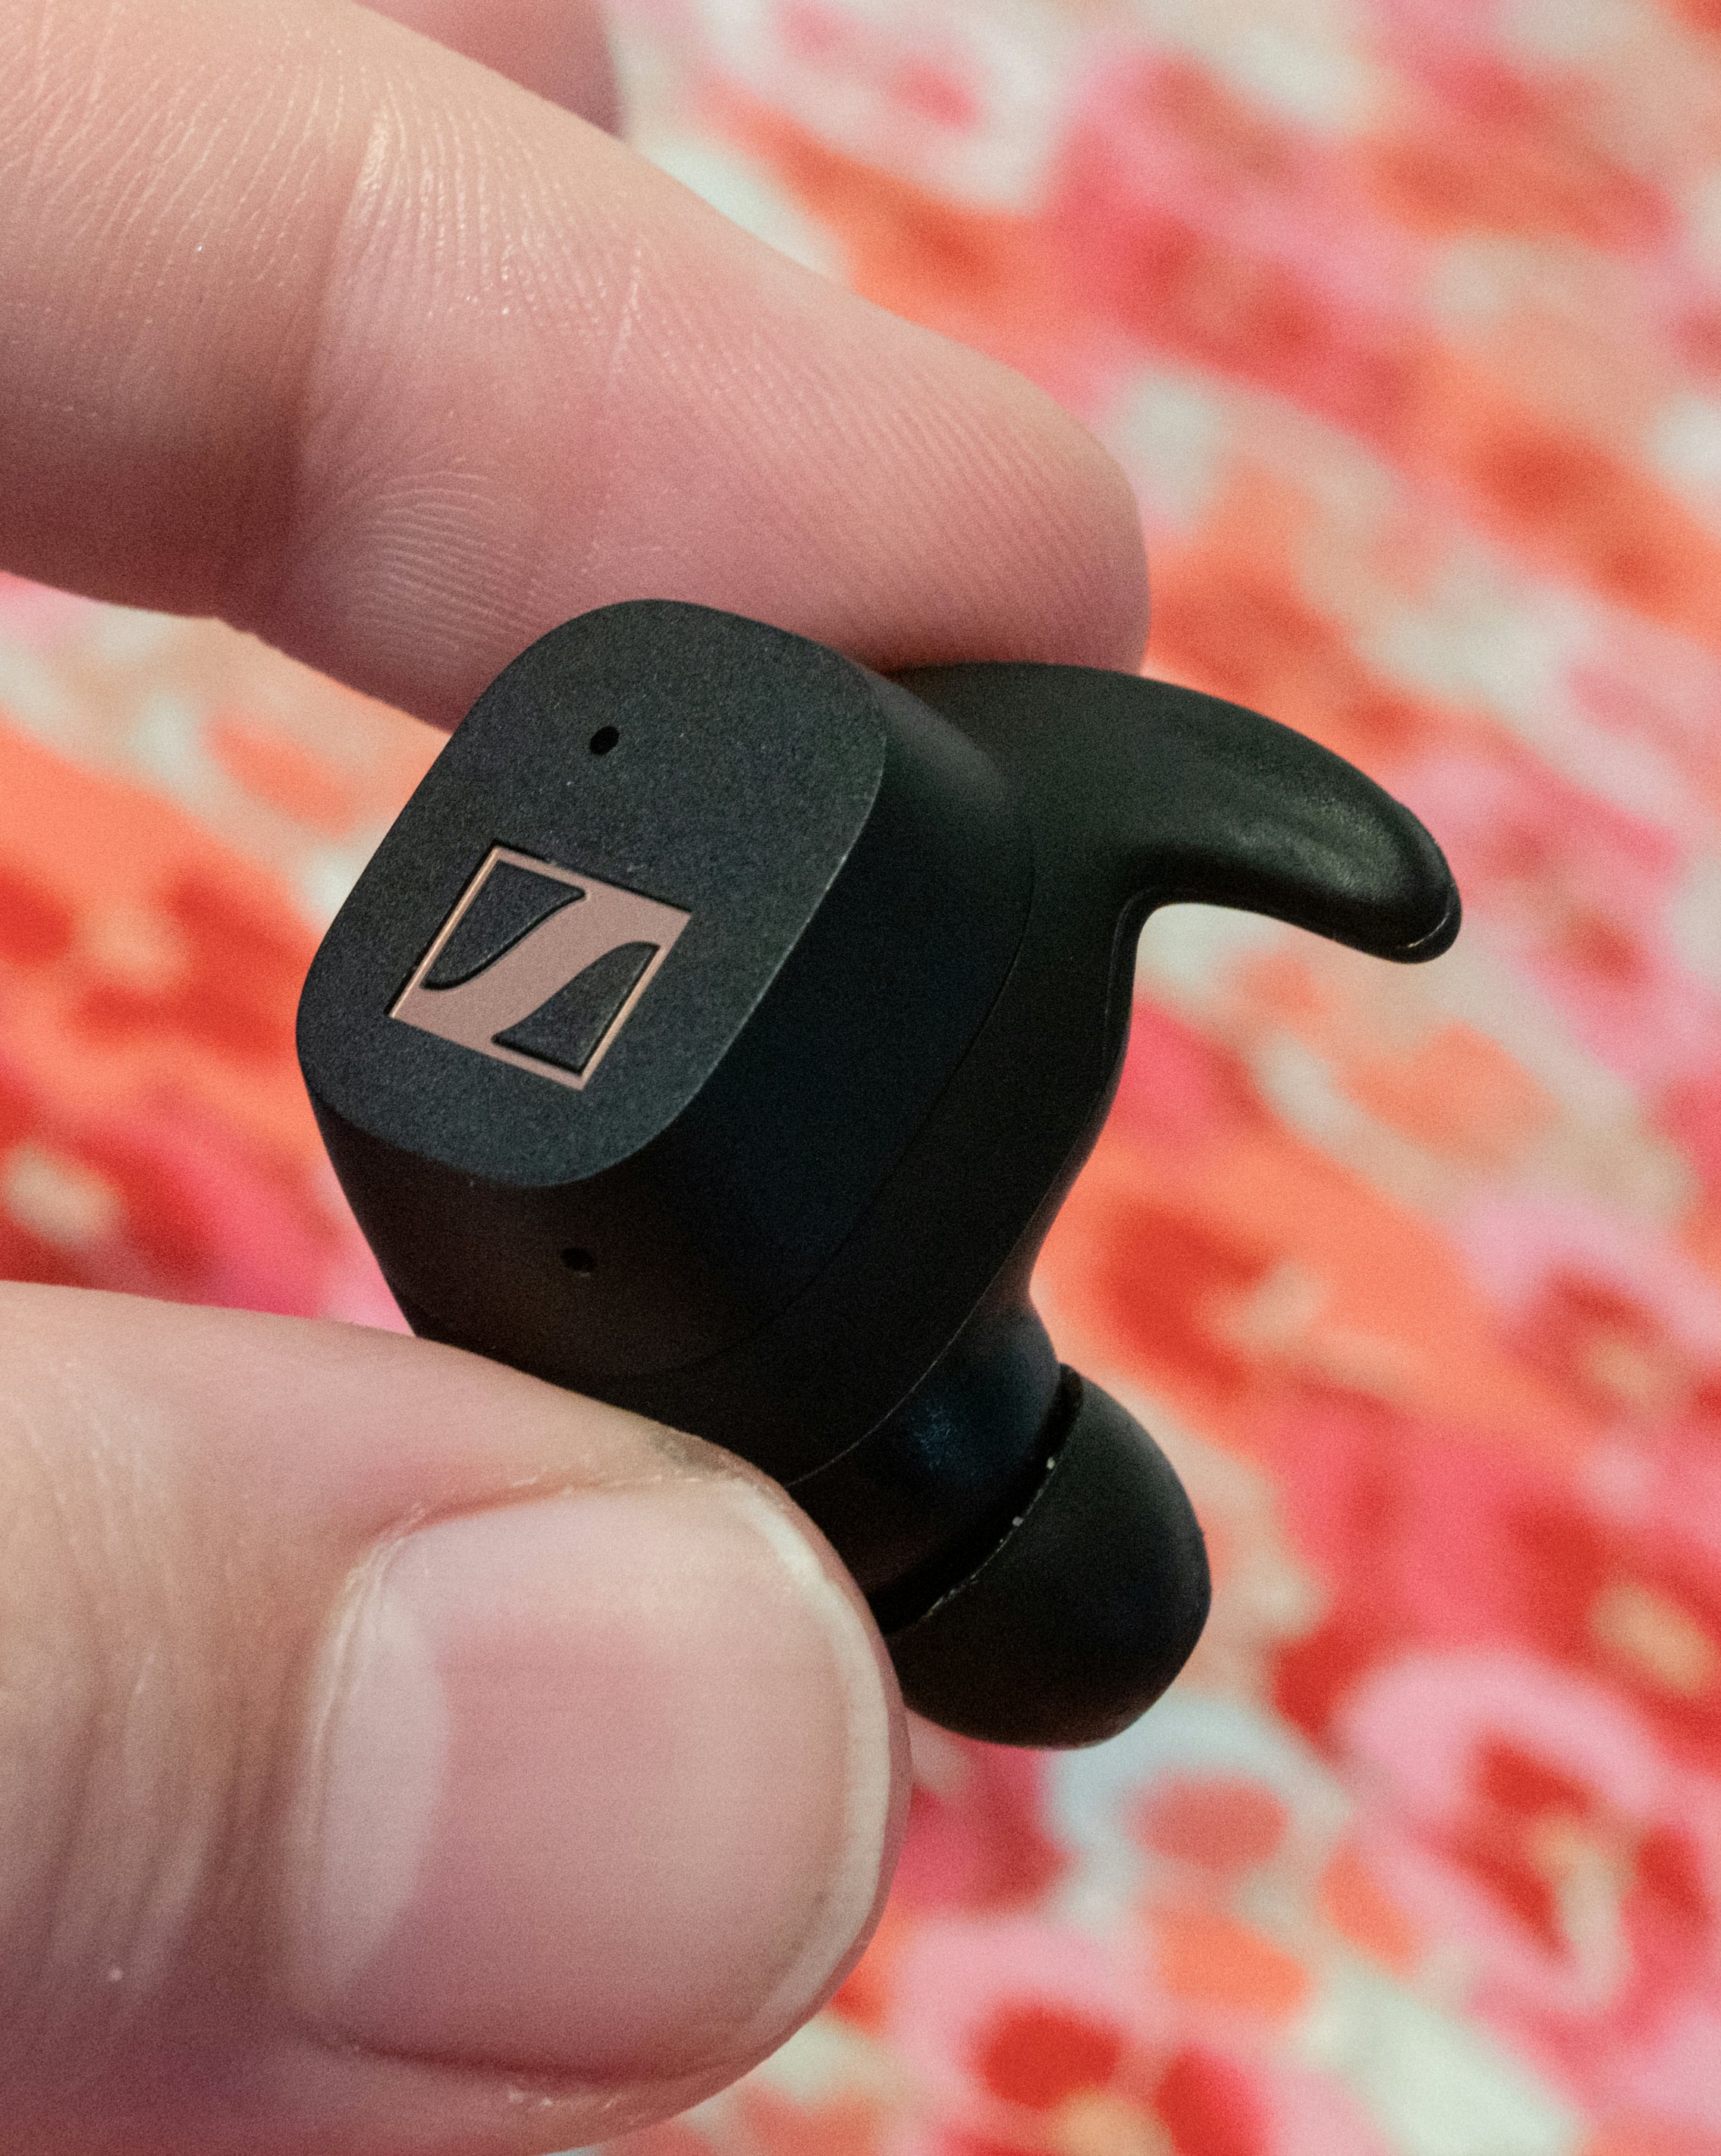 Sennheiser Sport review: These $130 wireless earbuds are gym bag 